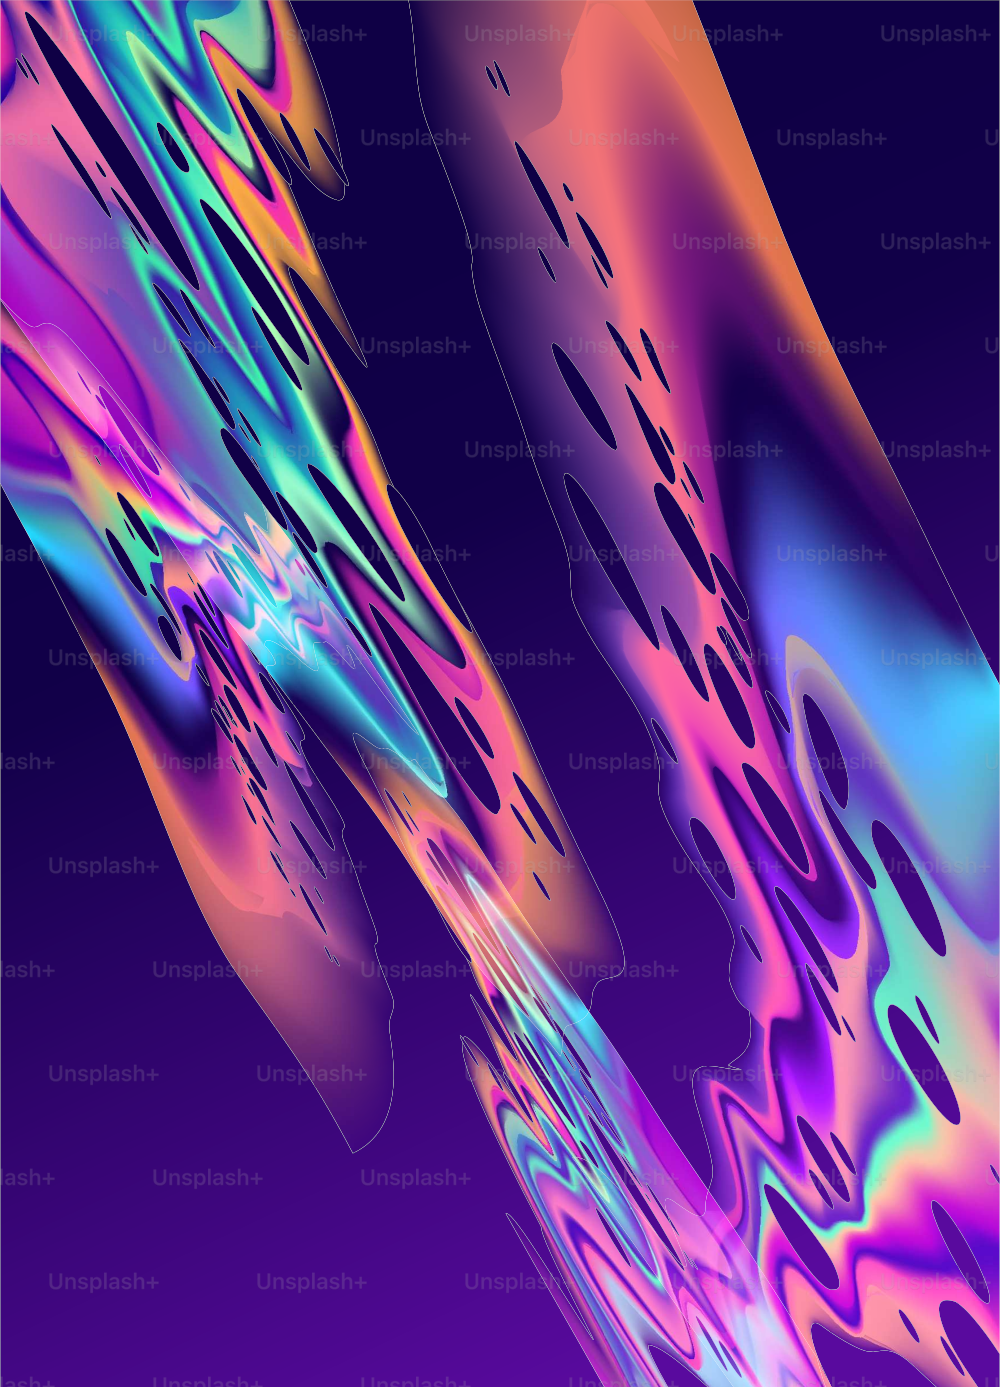 Colourful psychedelic acid wave pattern and texture background. Vector illustration.